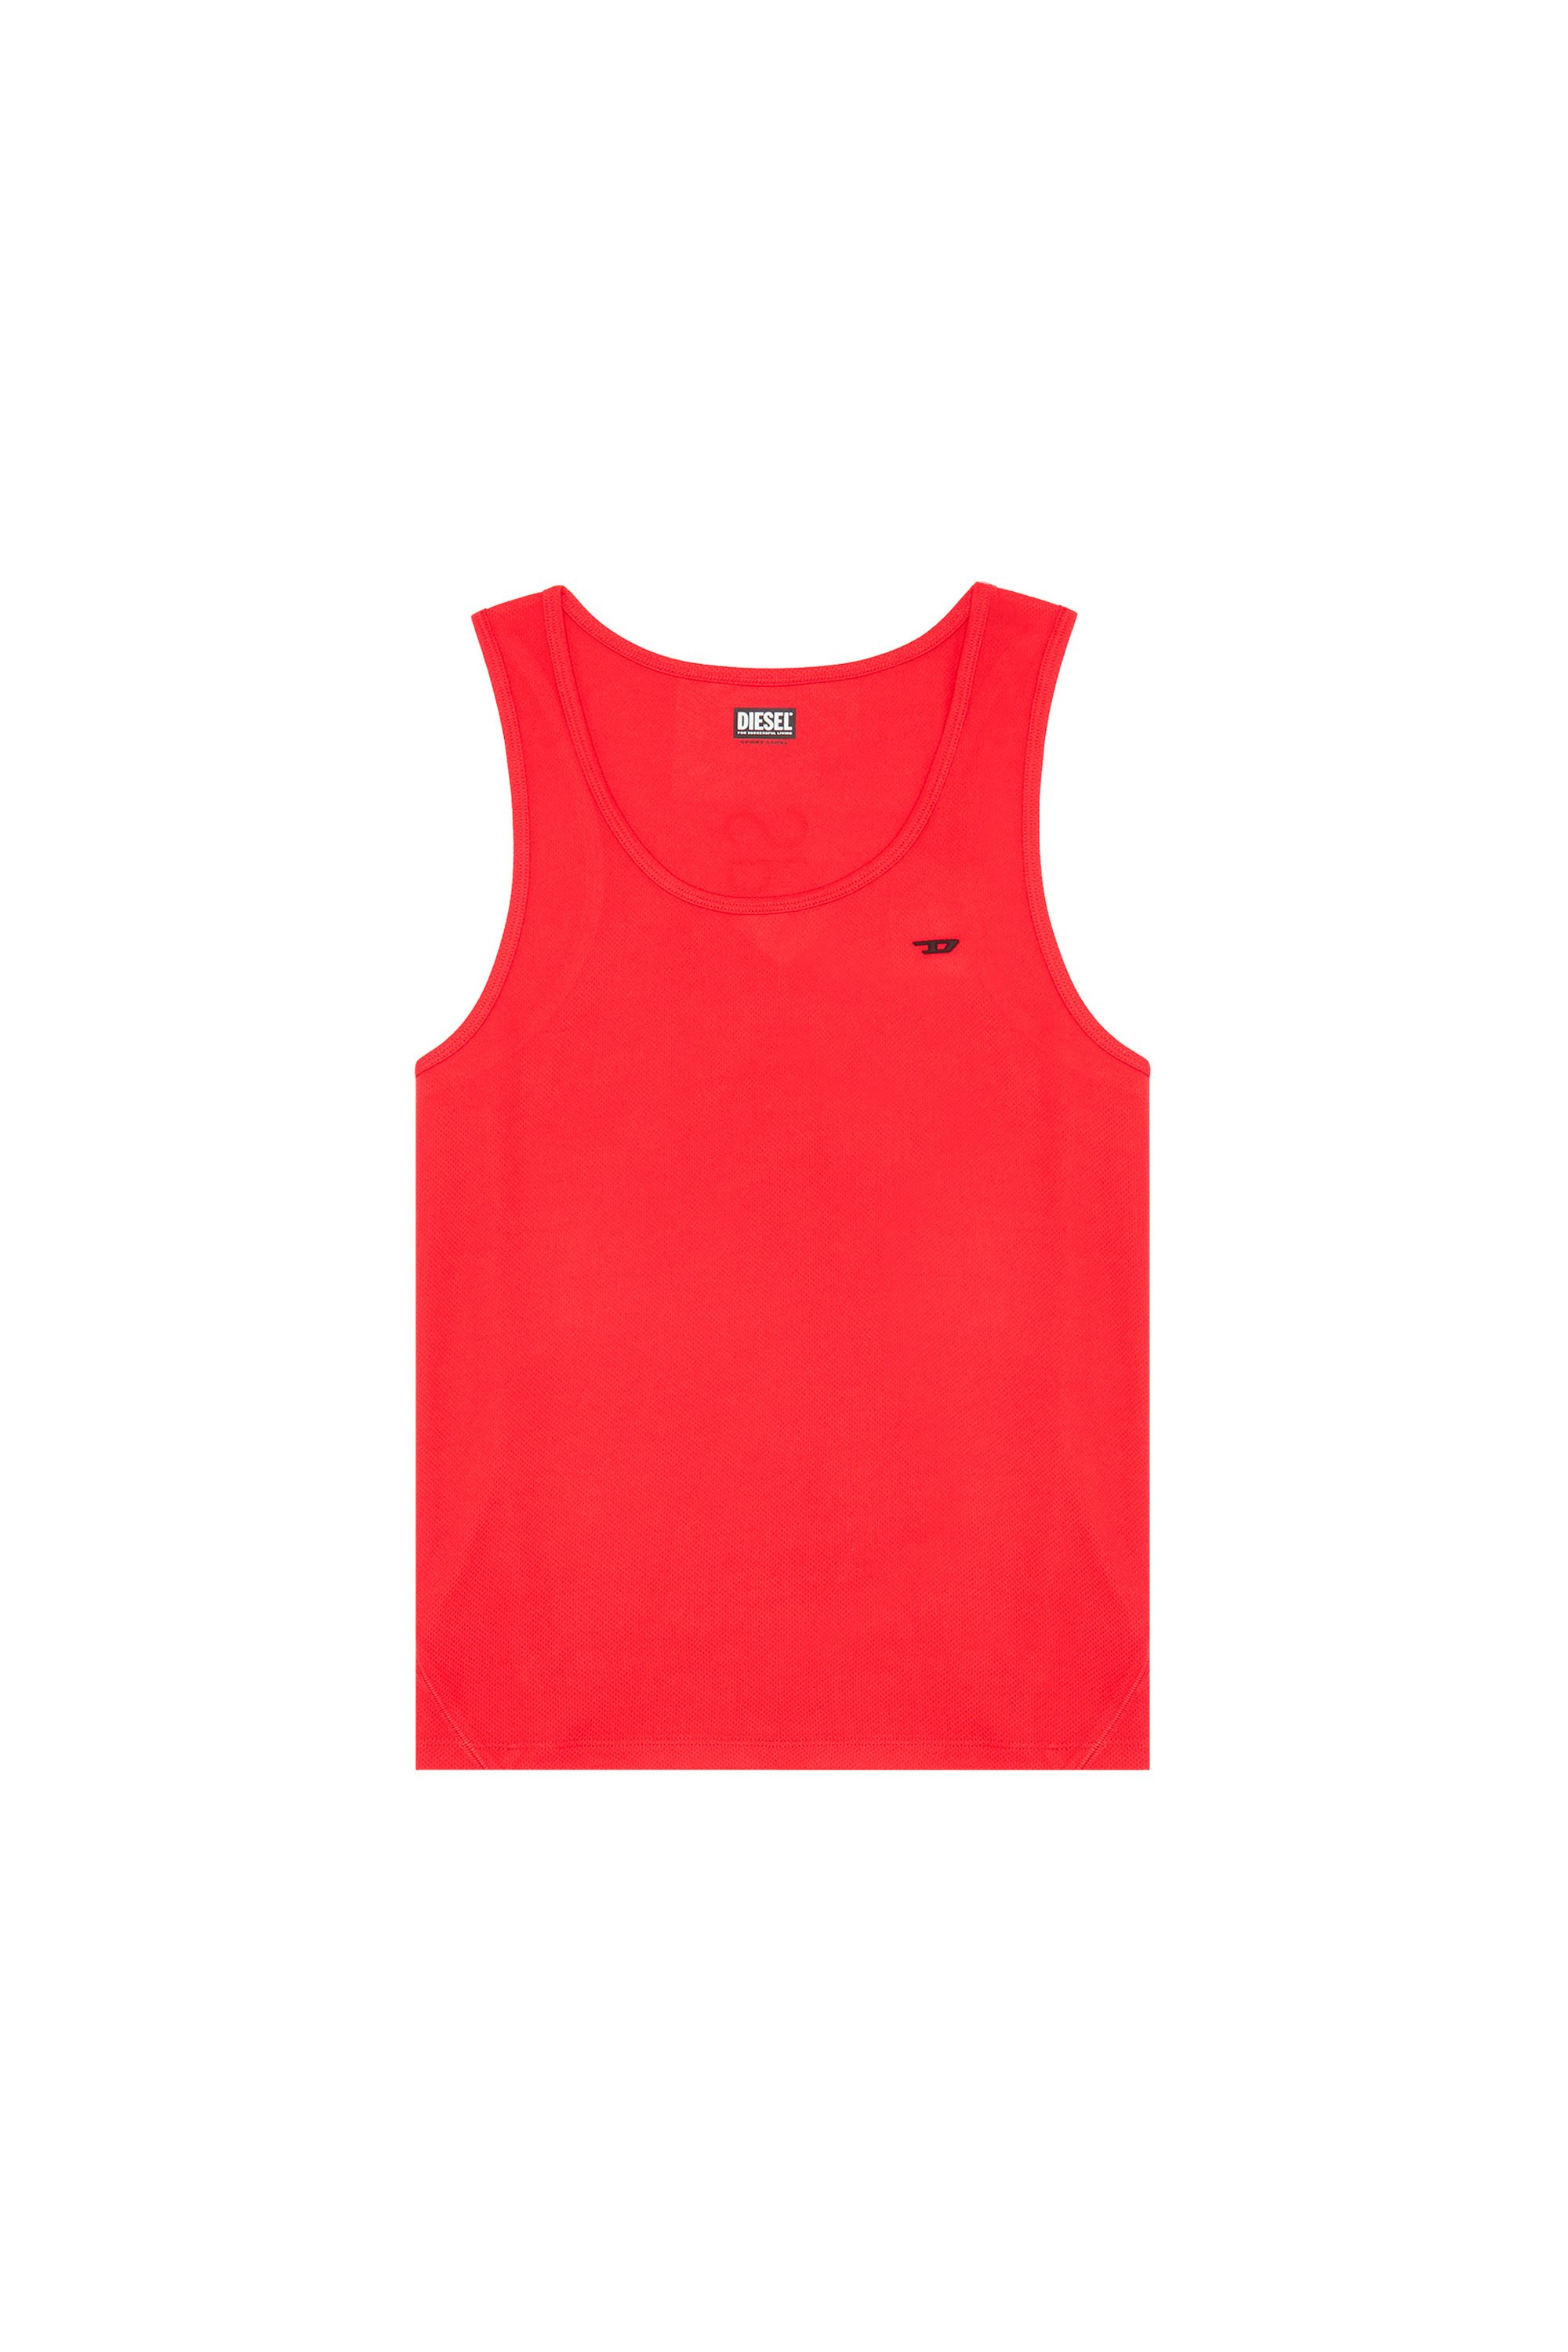 Diesel - AMST-SESSIOM-WT16, Rosso - Image 3